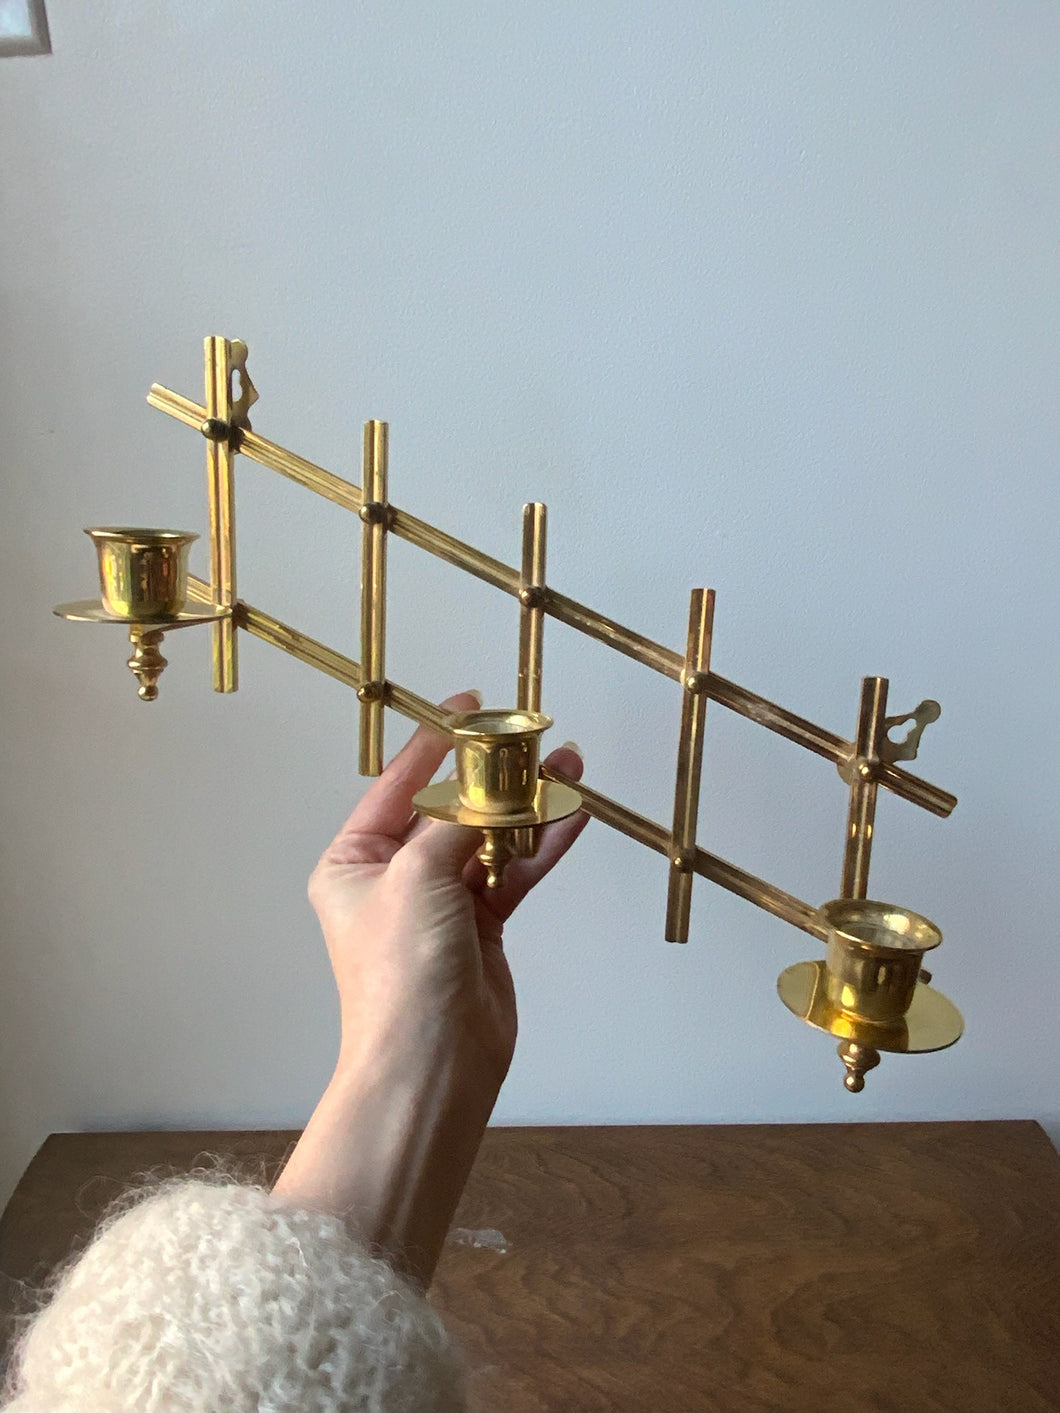 Very Cool Angle Adjustable Brass Candle Wall Sconce